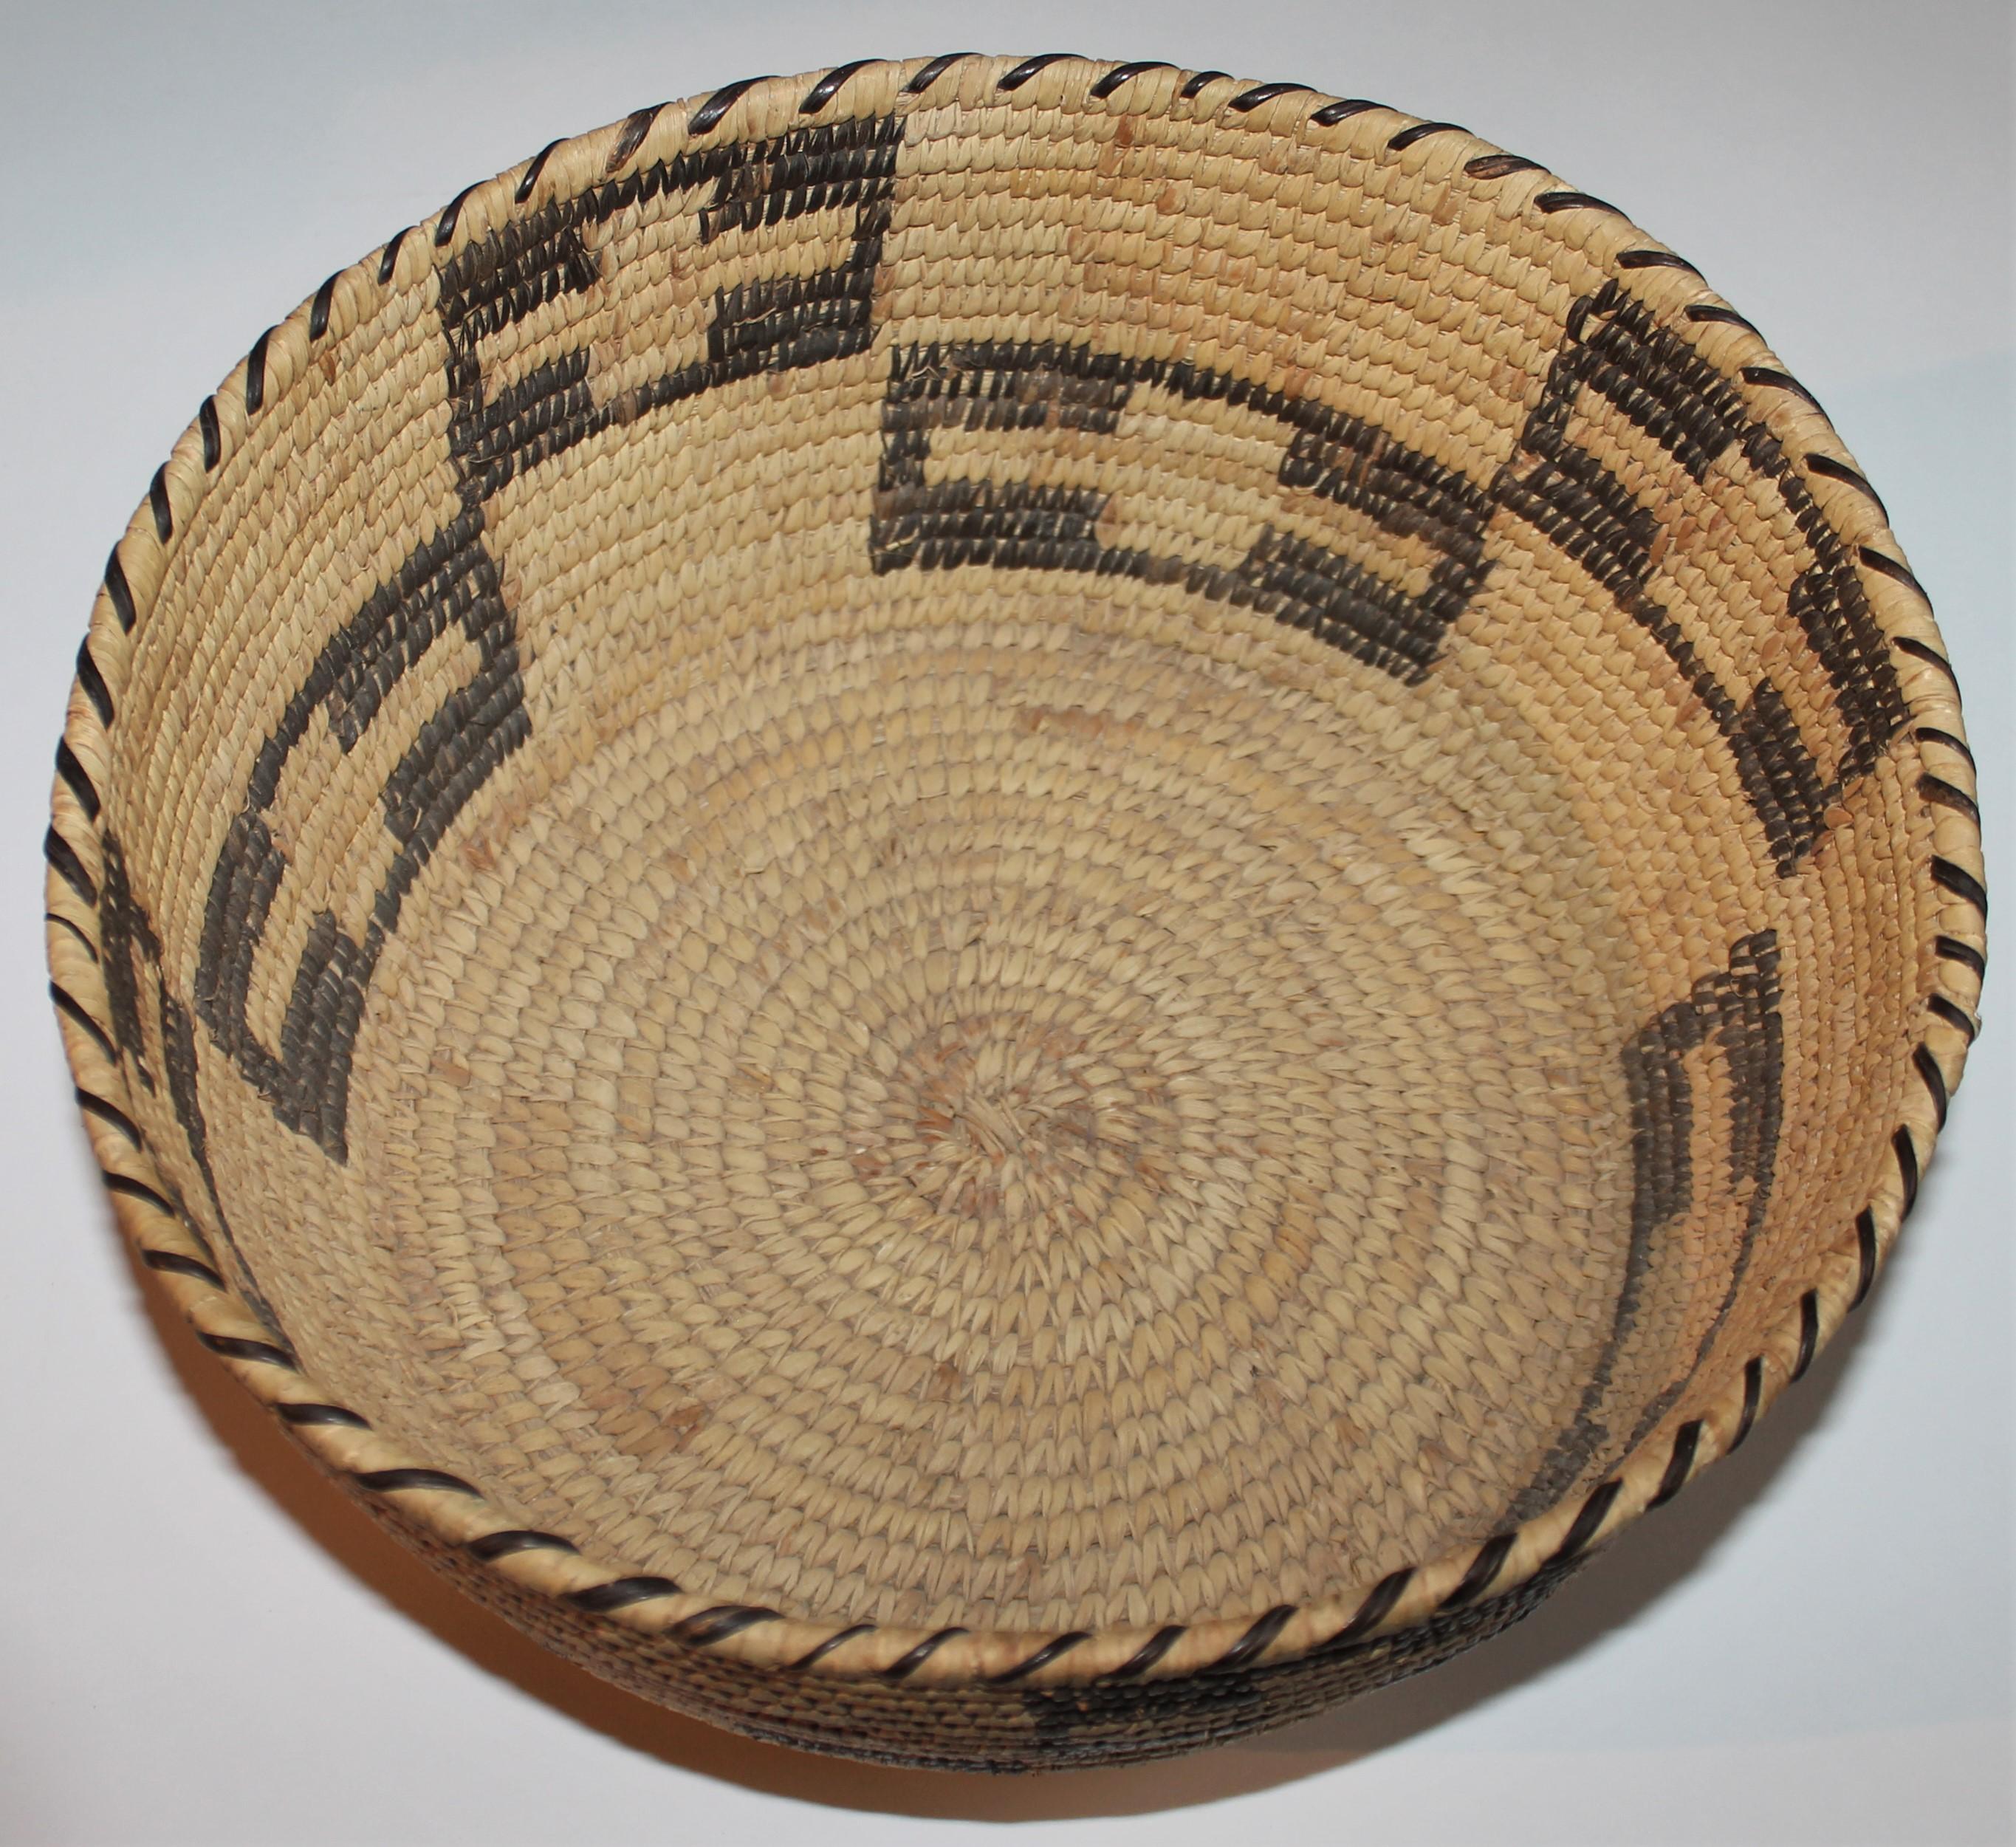 Hand-Woven 20th C Papago Bowl Shaped Basket With Geometric Cross Pattern For Sale